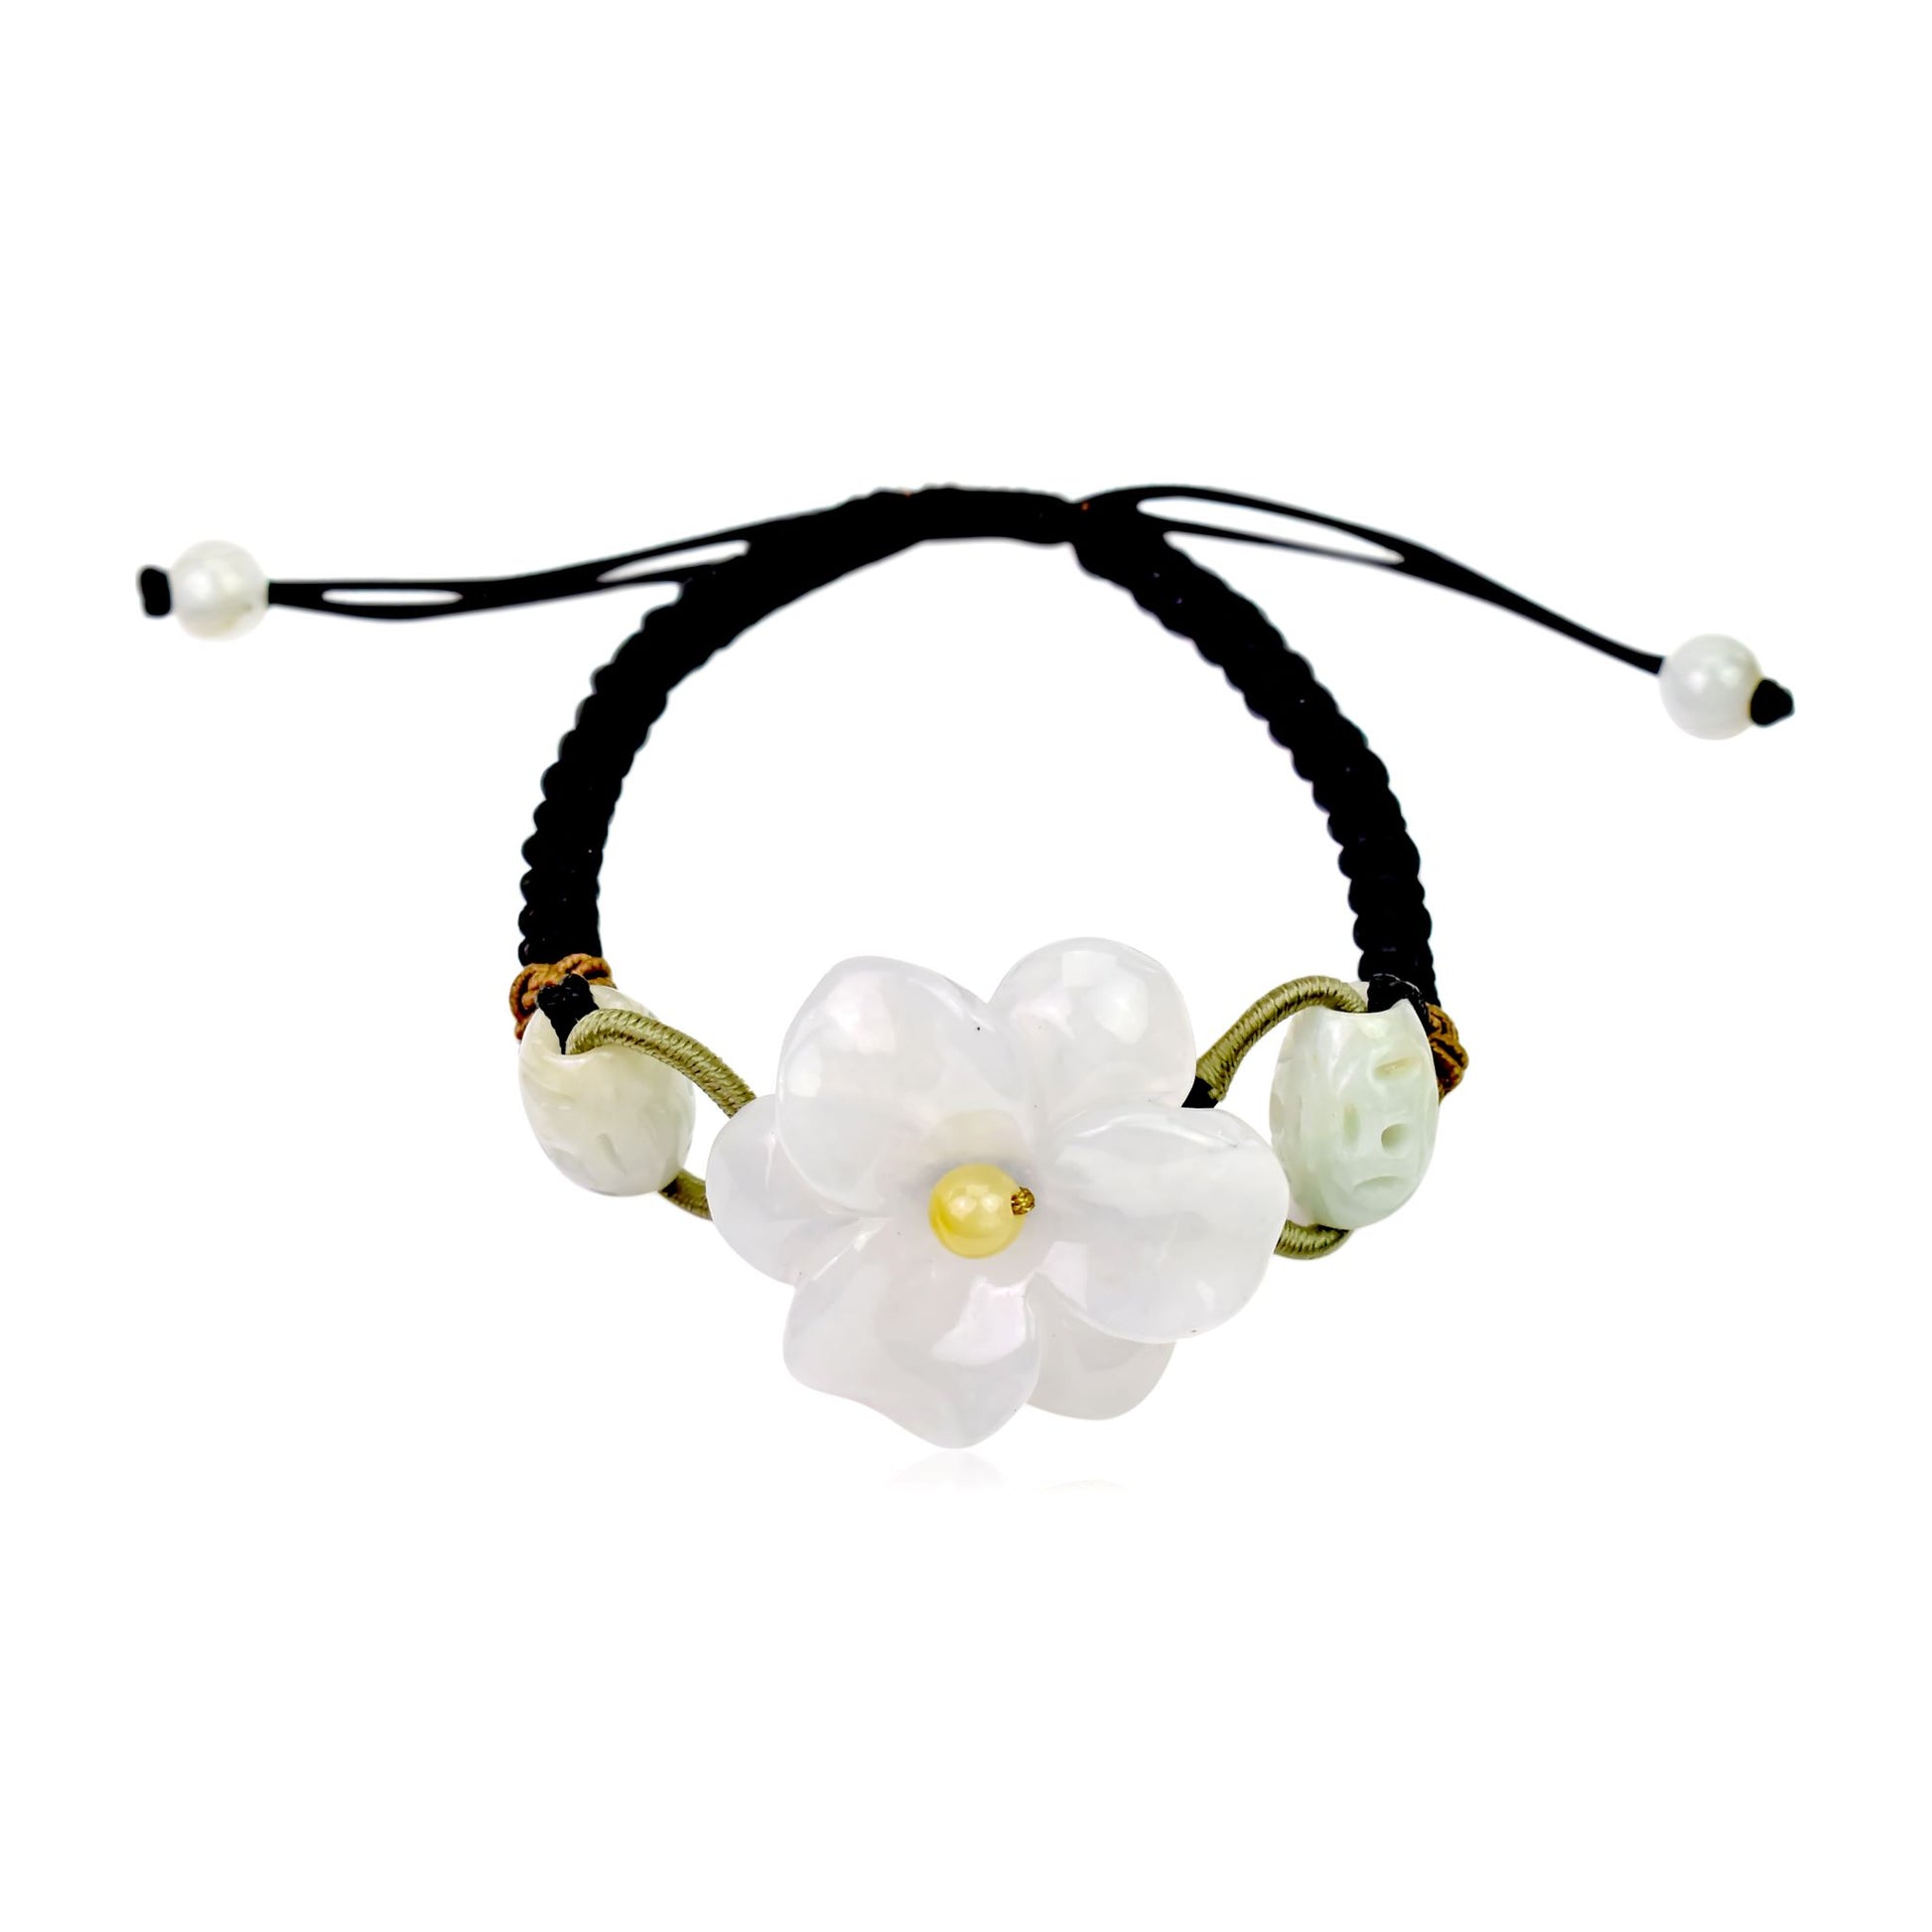 Show Off Your Unique Style with the Amaryllis Jade Bracelet made with Black Cord